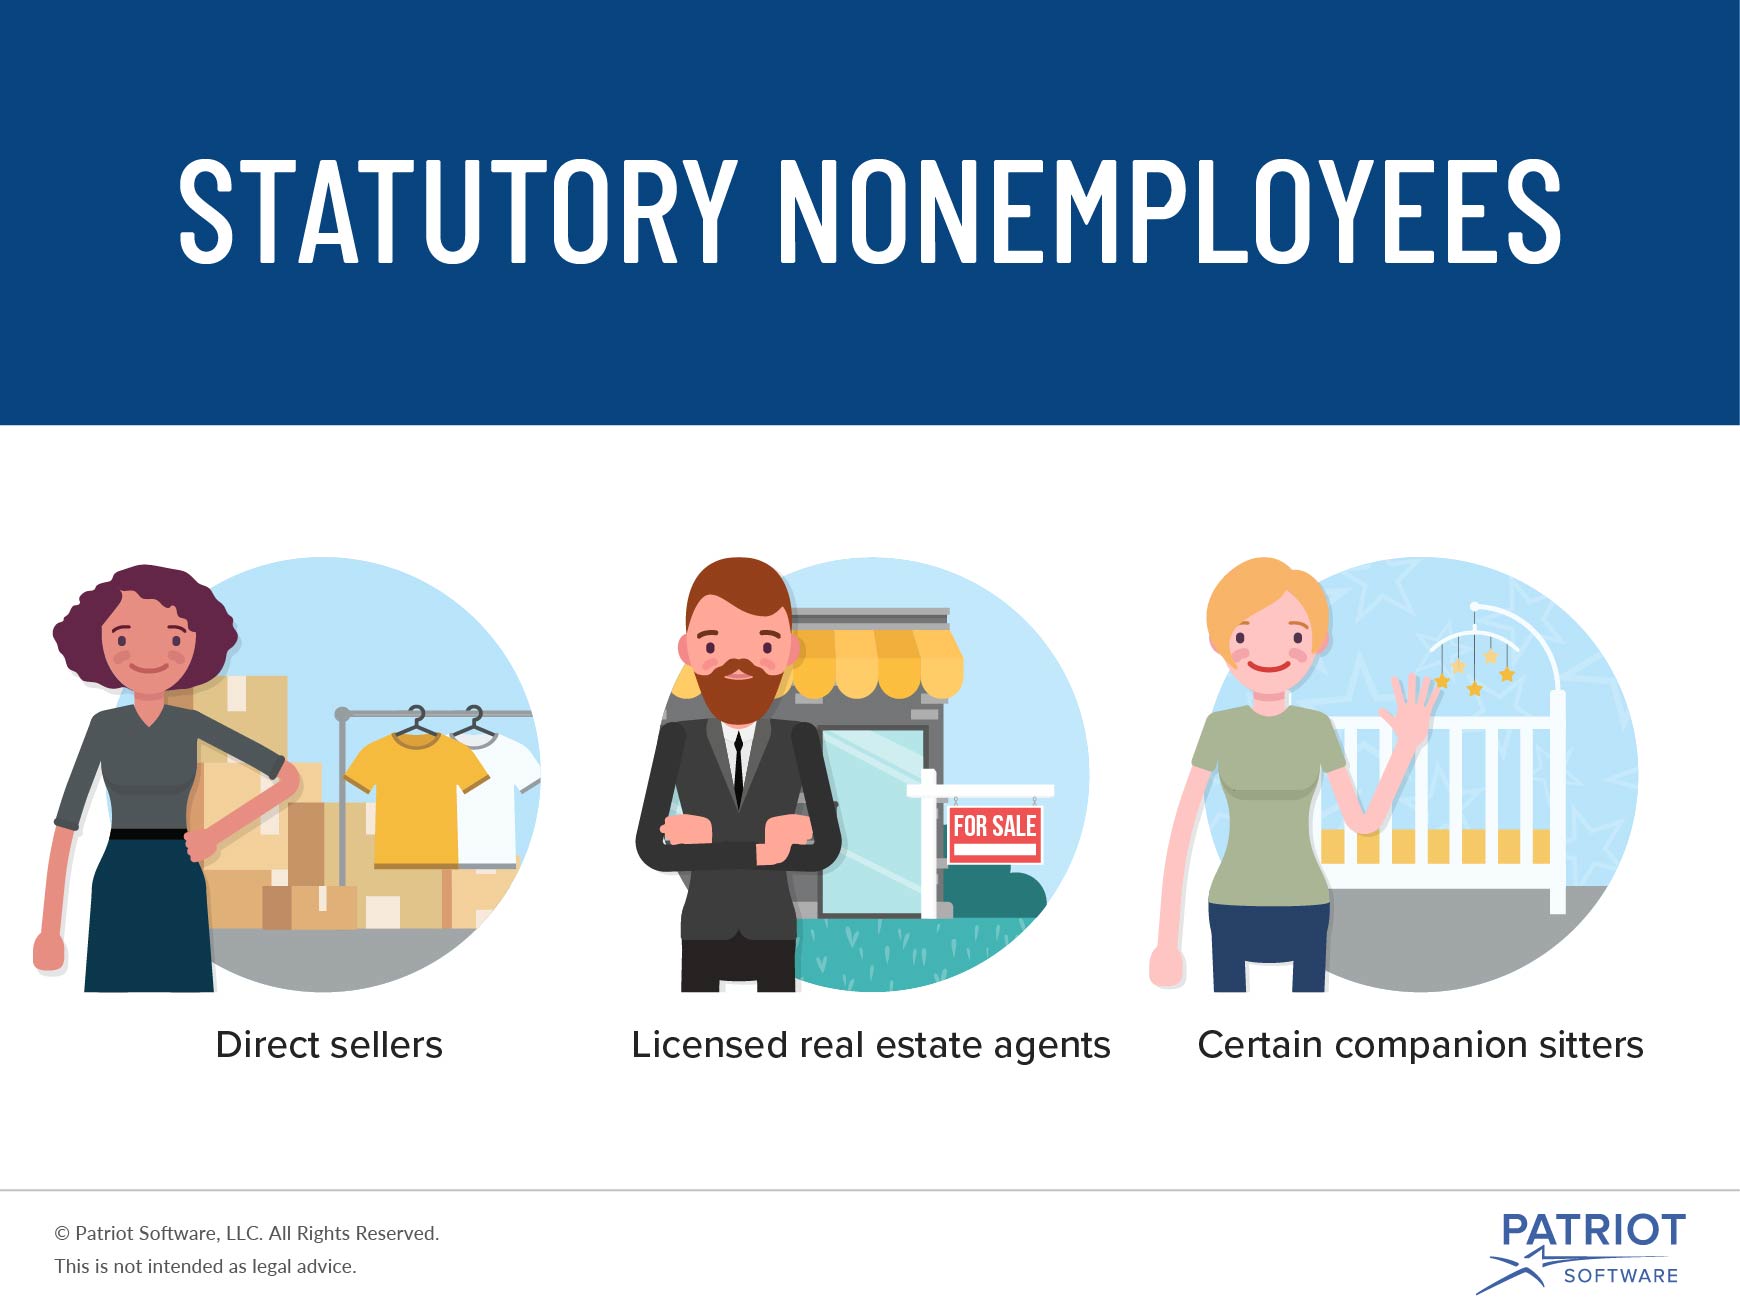 what is a statutory nonemployee?